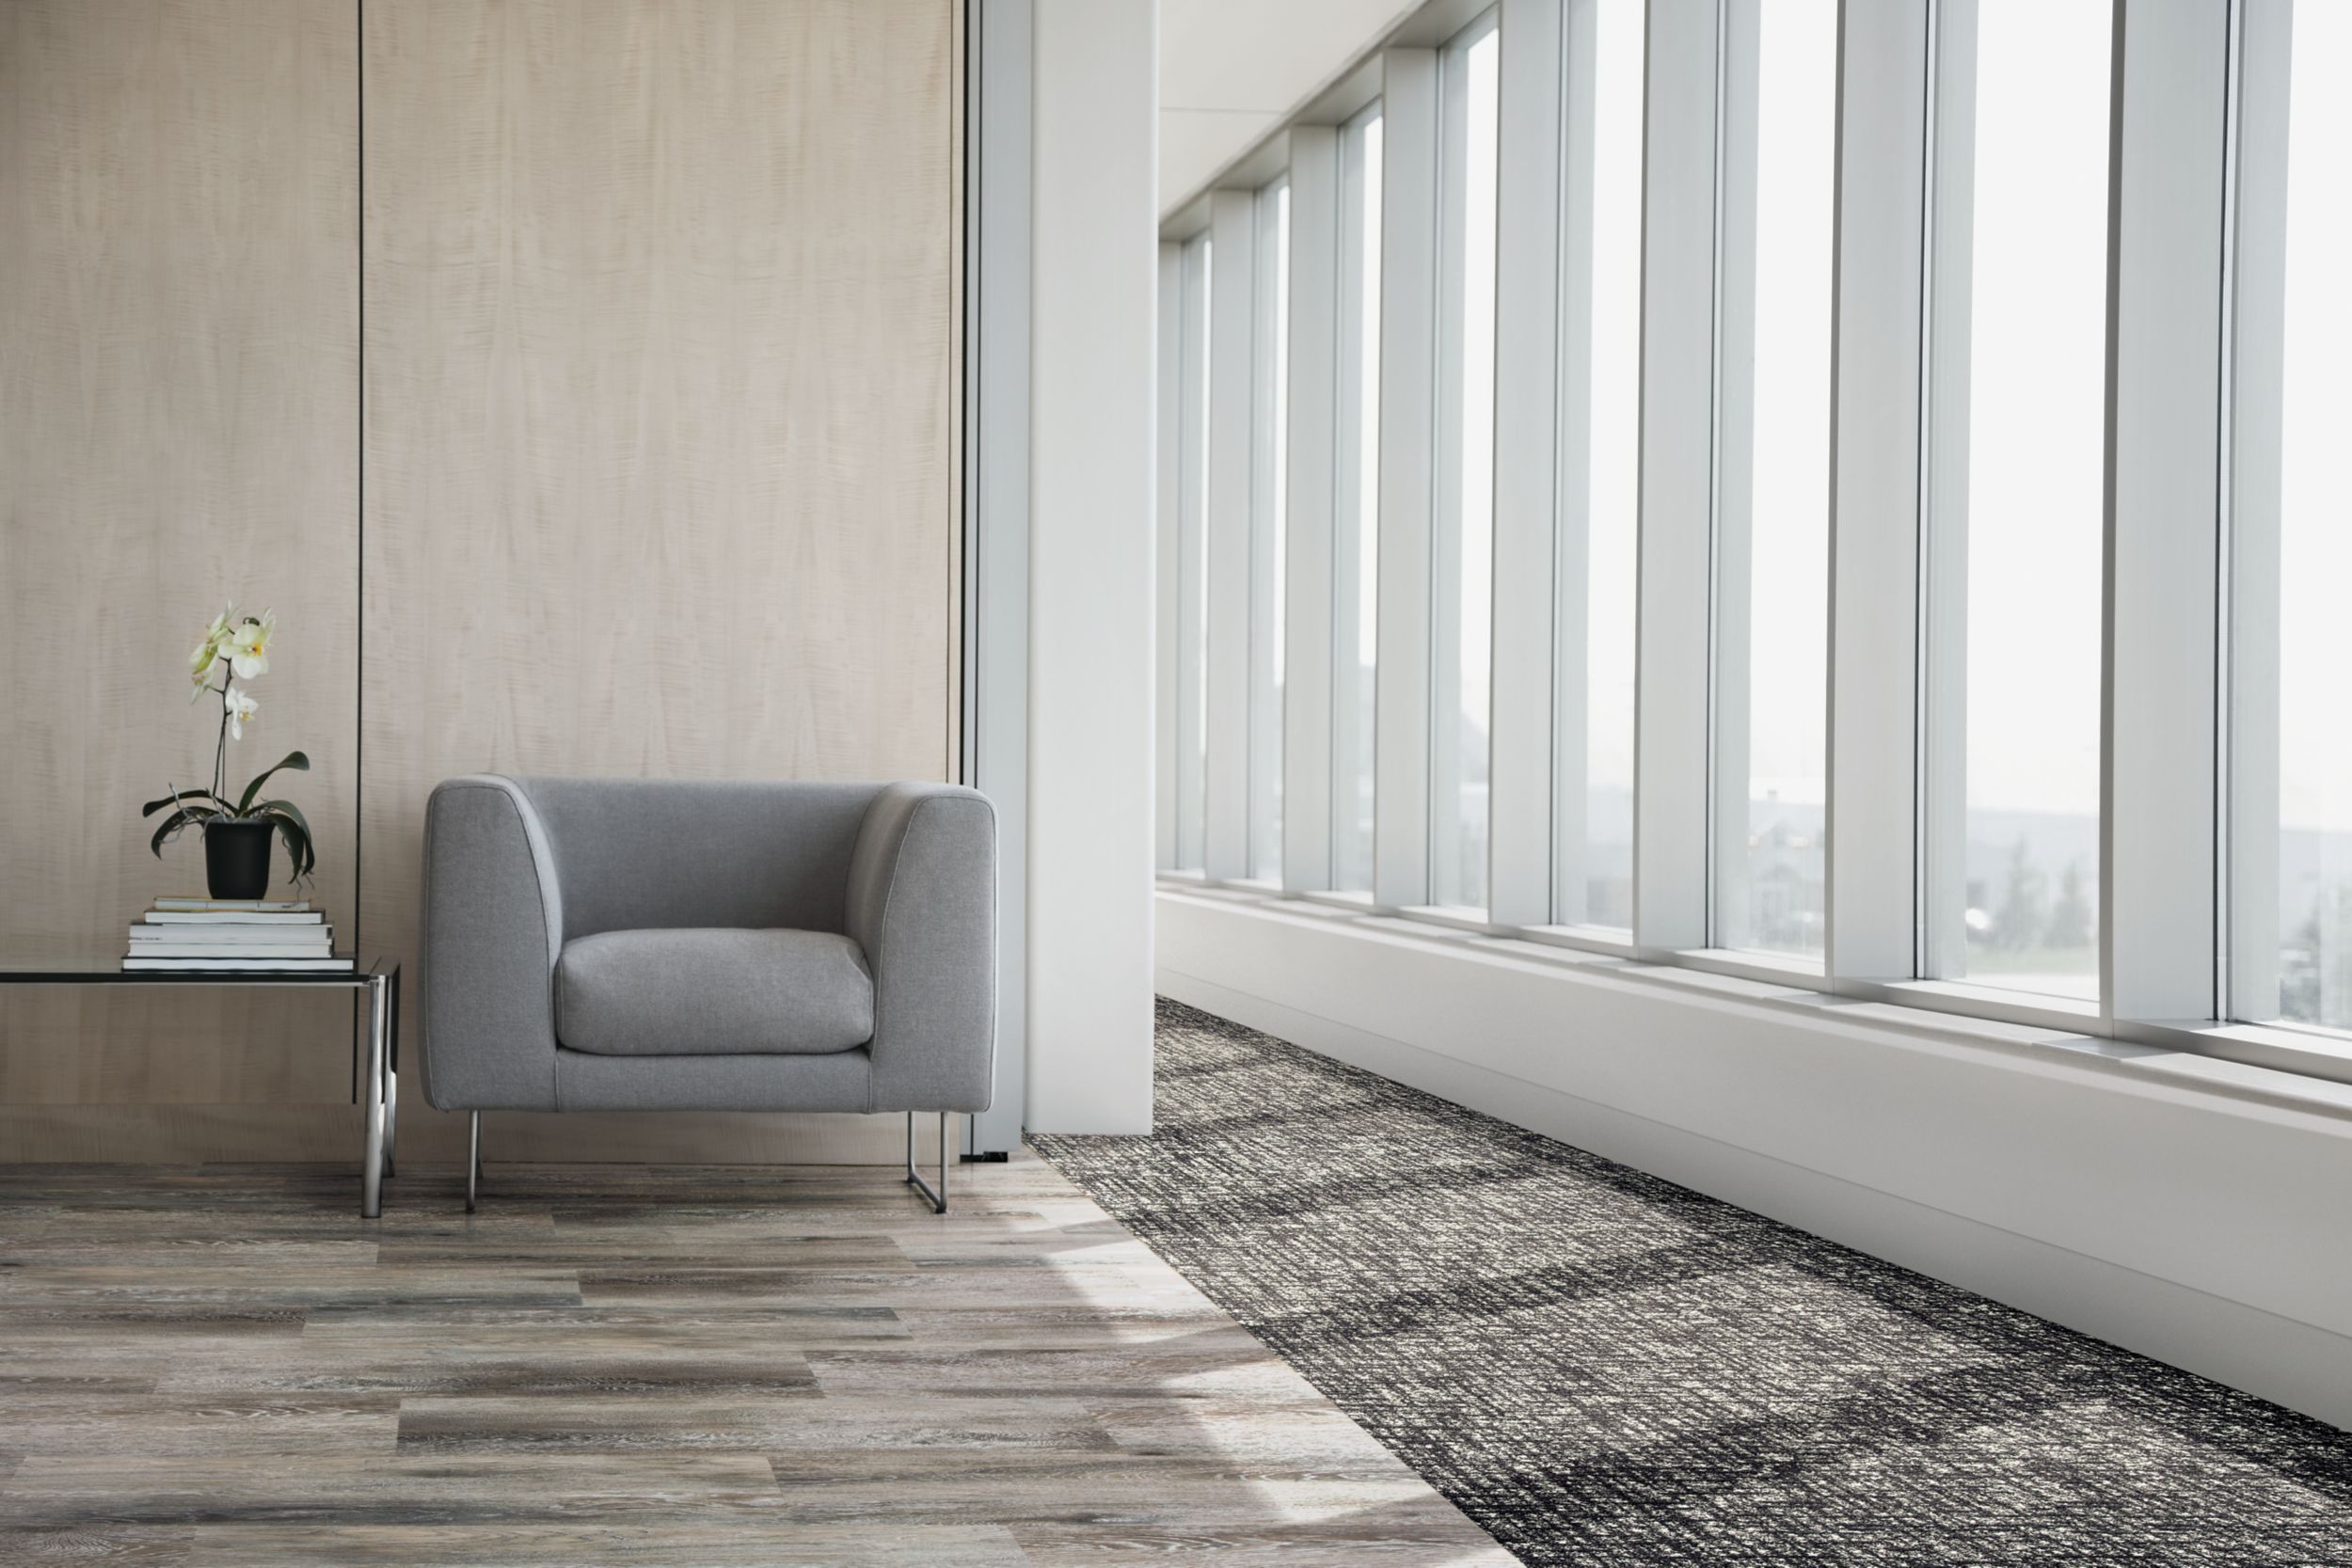 Interface Textured Woodgrains LVT and WW890 carpet tile in Lobby Setting with chair and table numéro d’image 4